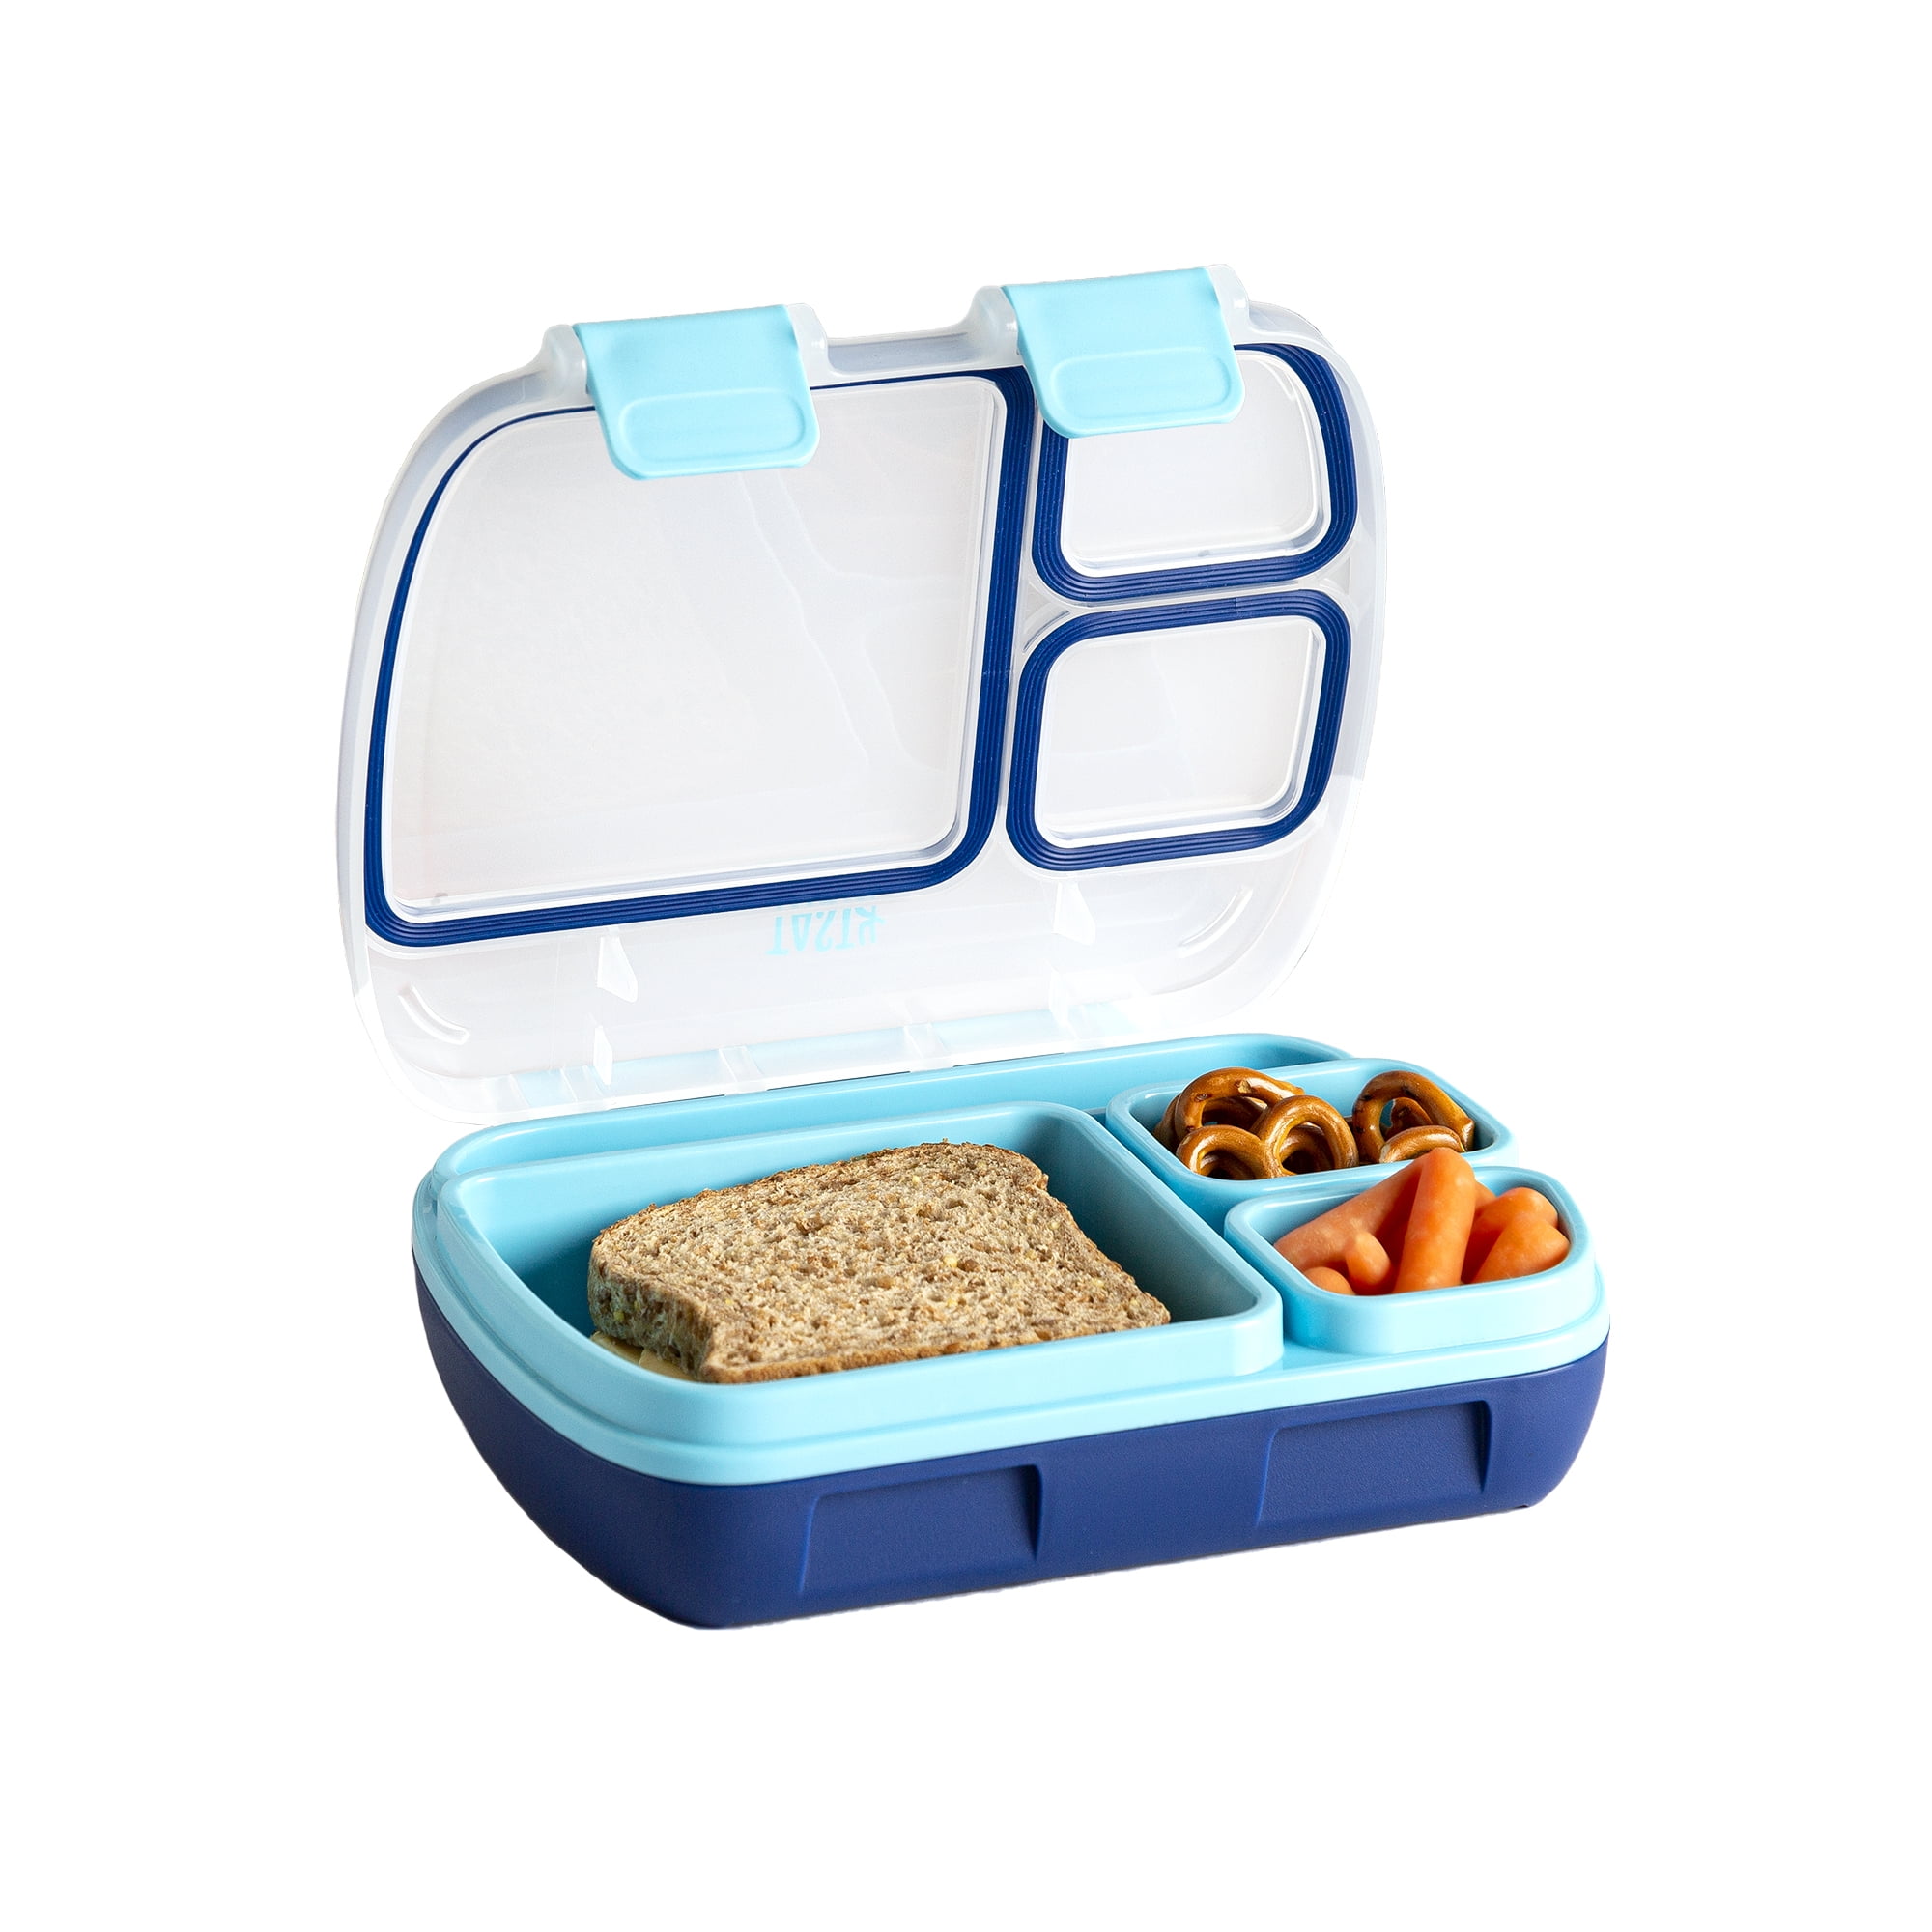 19 Adult Lunch Box Ideas to Get Excited About